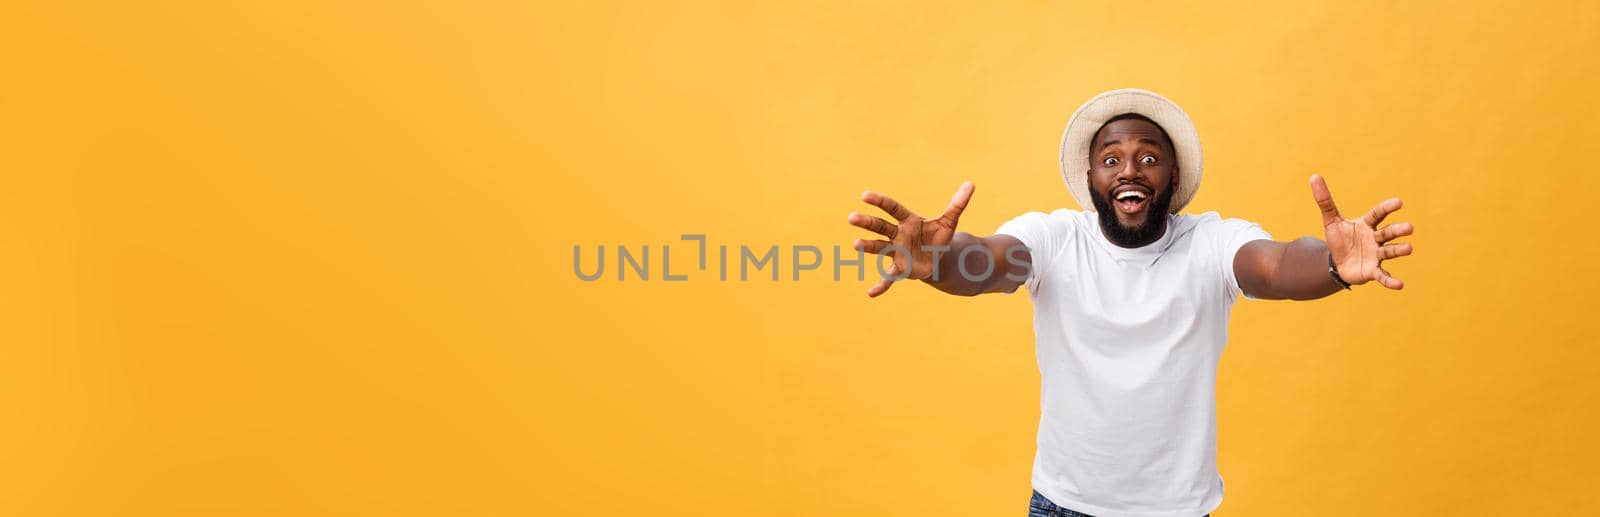 Come in my arms. Portrait of joyful friendly and happy handsome African American man with beard and short haircut, smiling broadly and pulling hands towards camera to give warm hug or cuddle